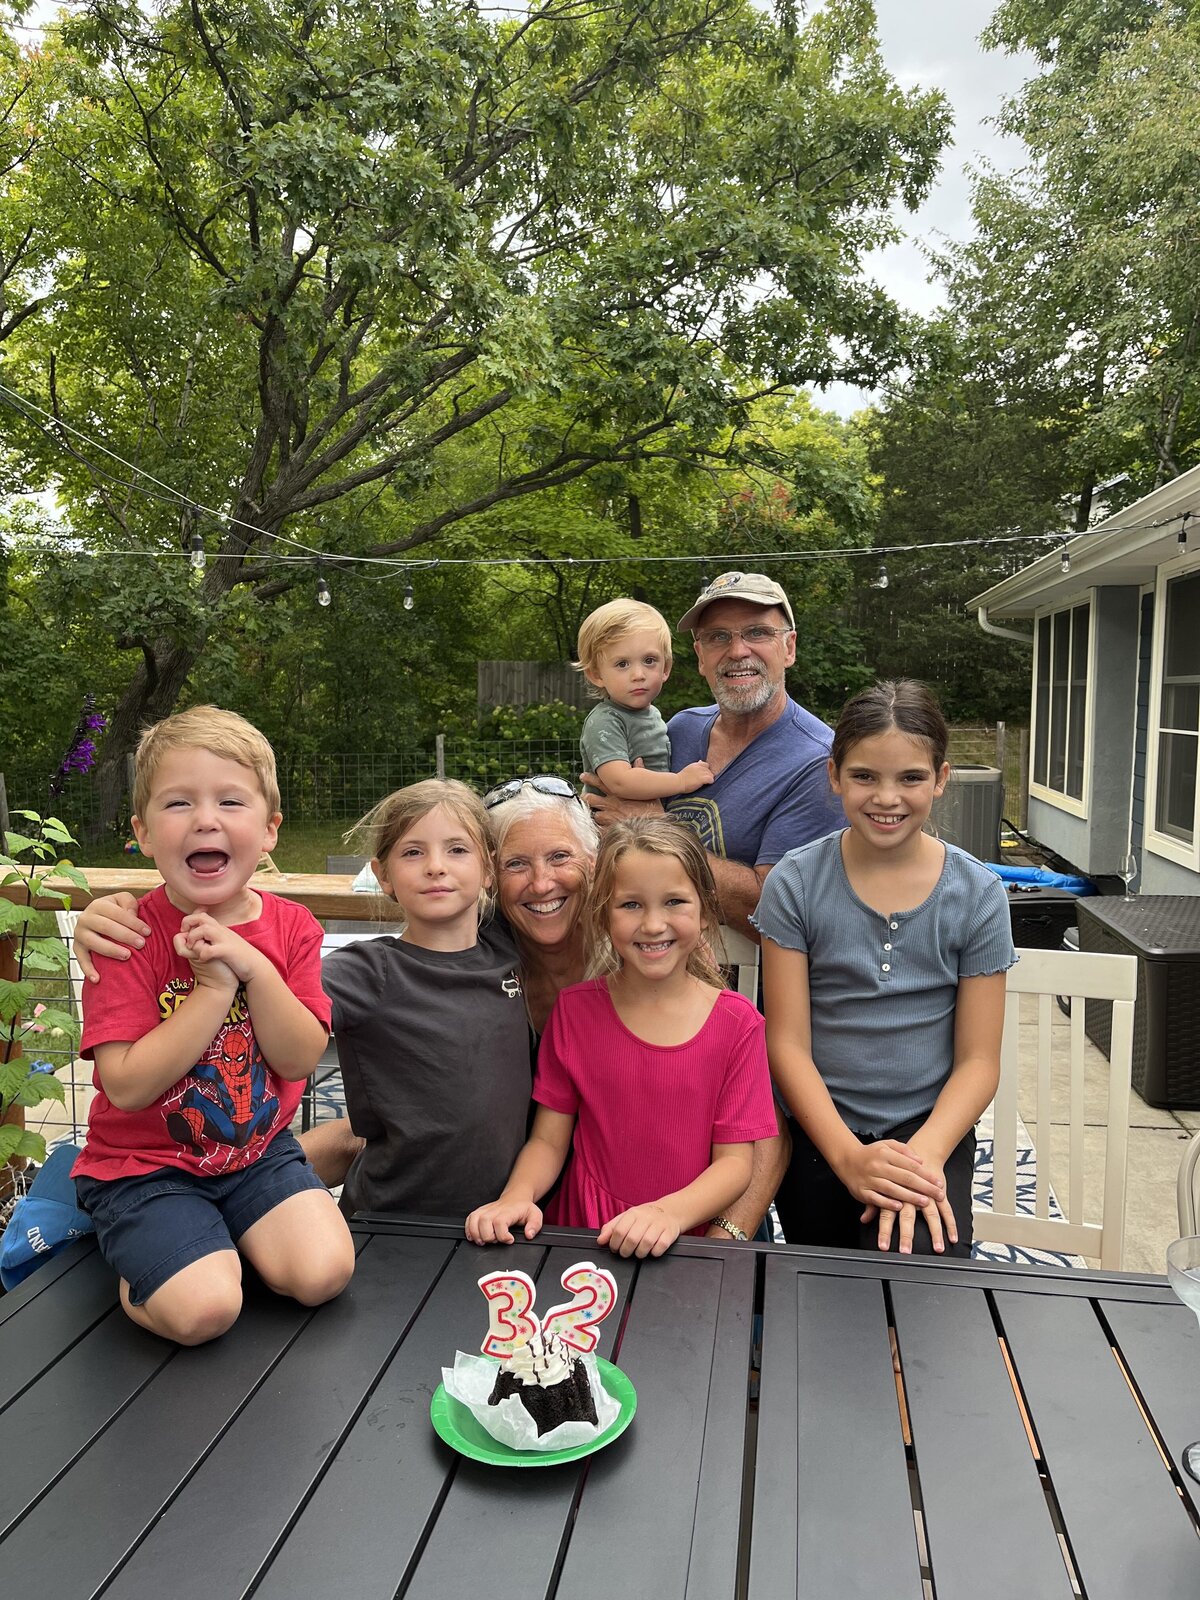 grandma and grandpa with their grandkids outside for a birthday party